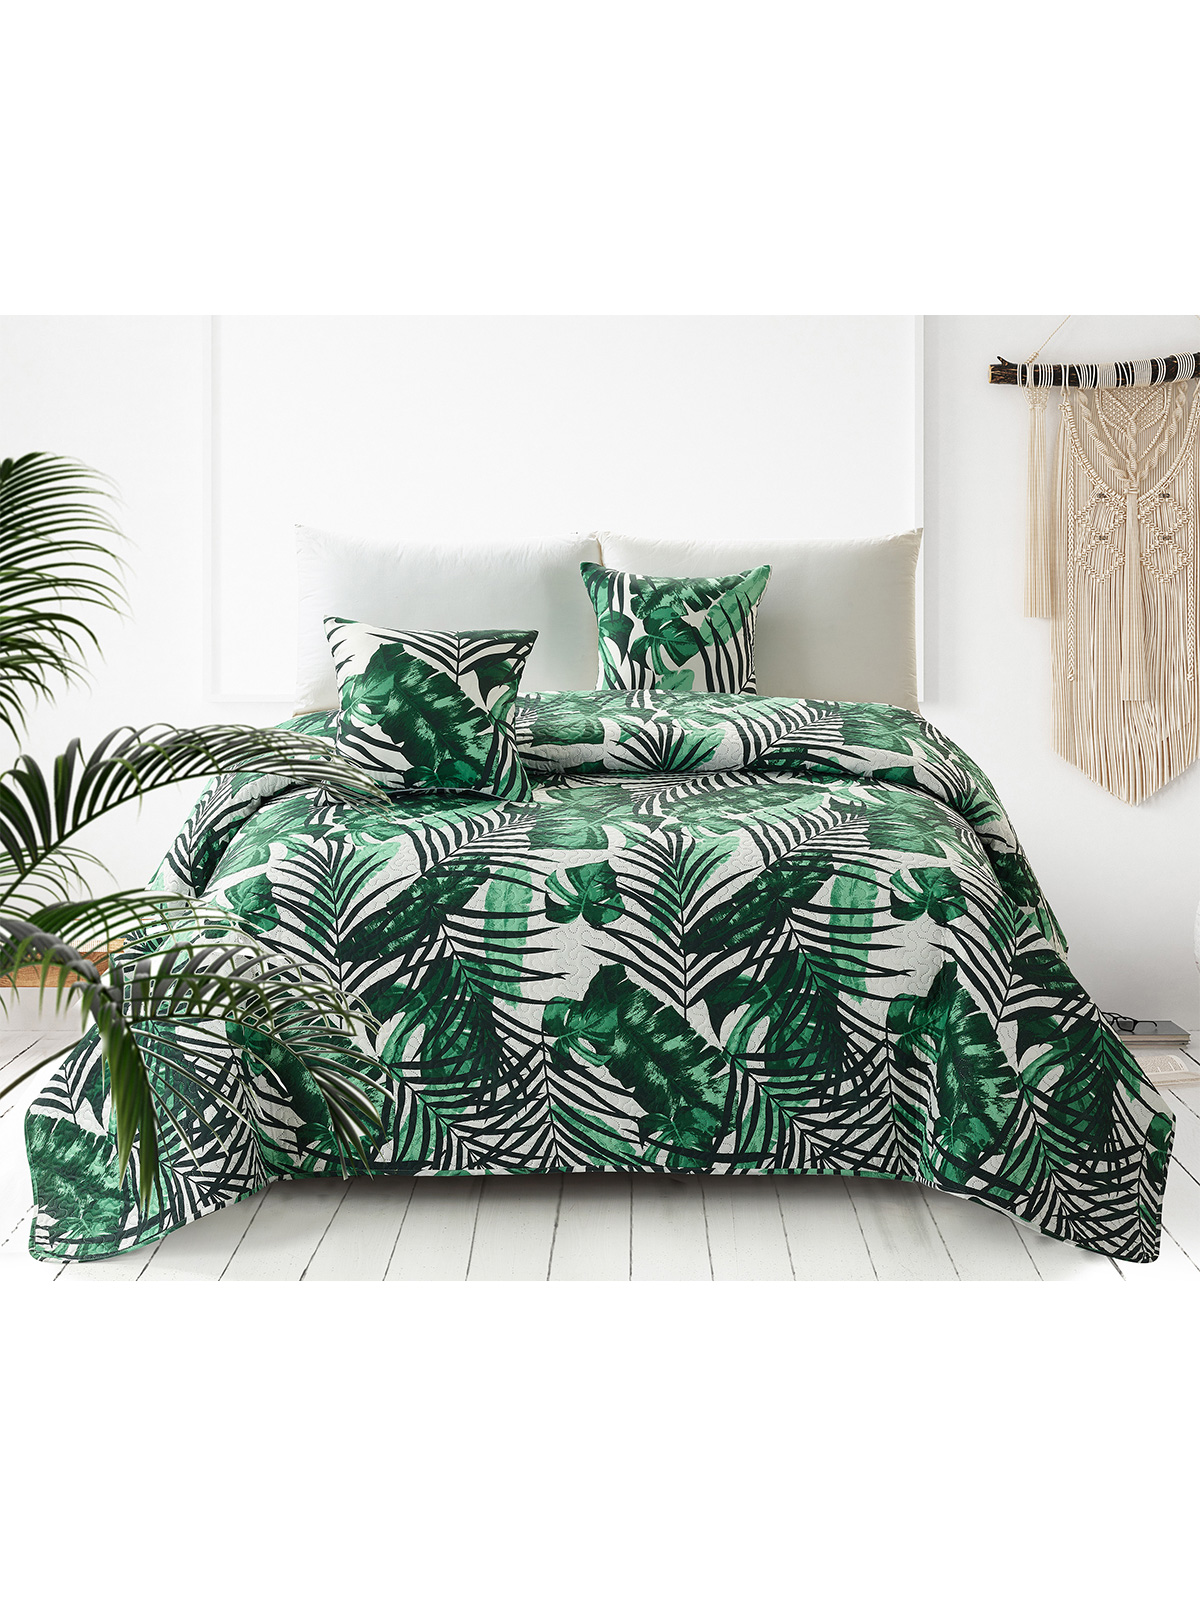 Edoti Quilted Bedspread With Palms Jungle A537